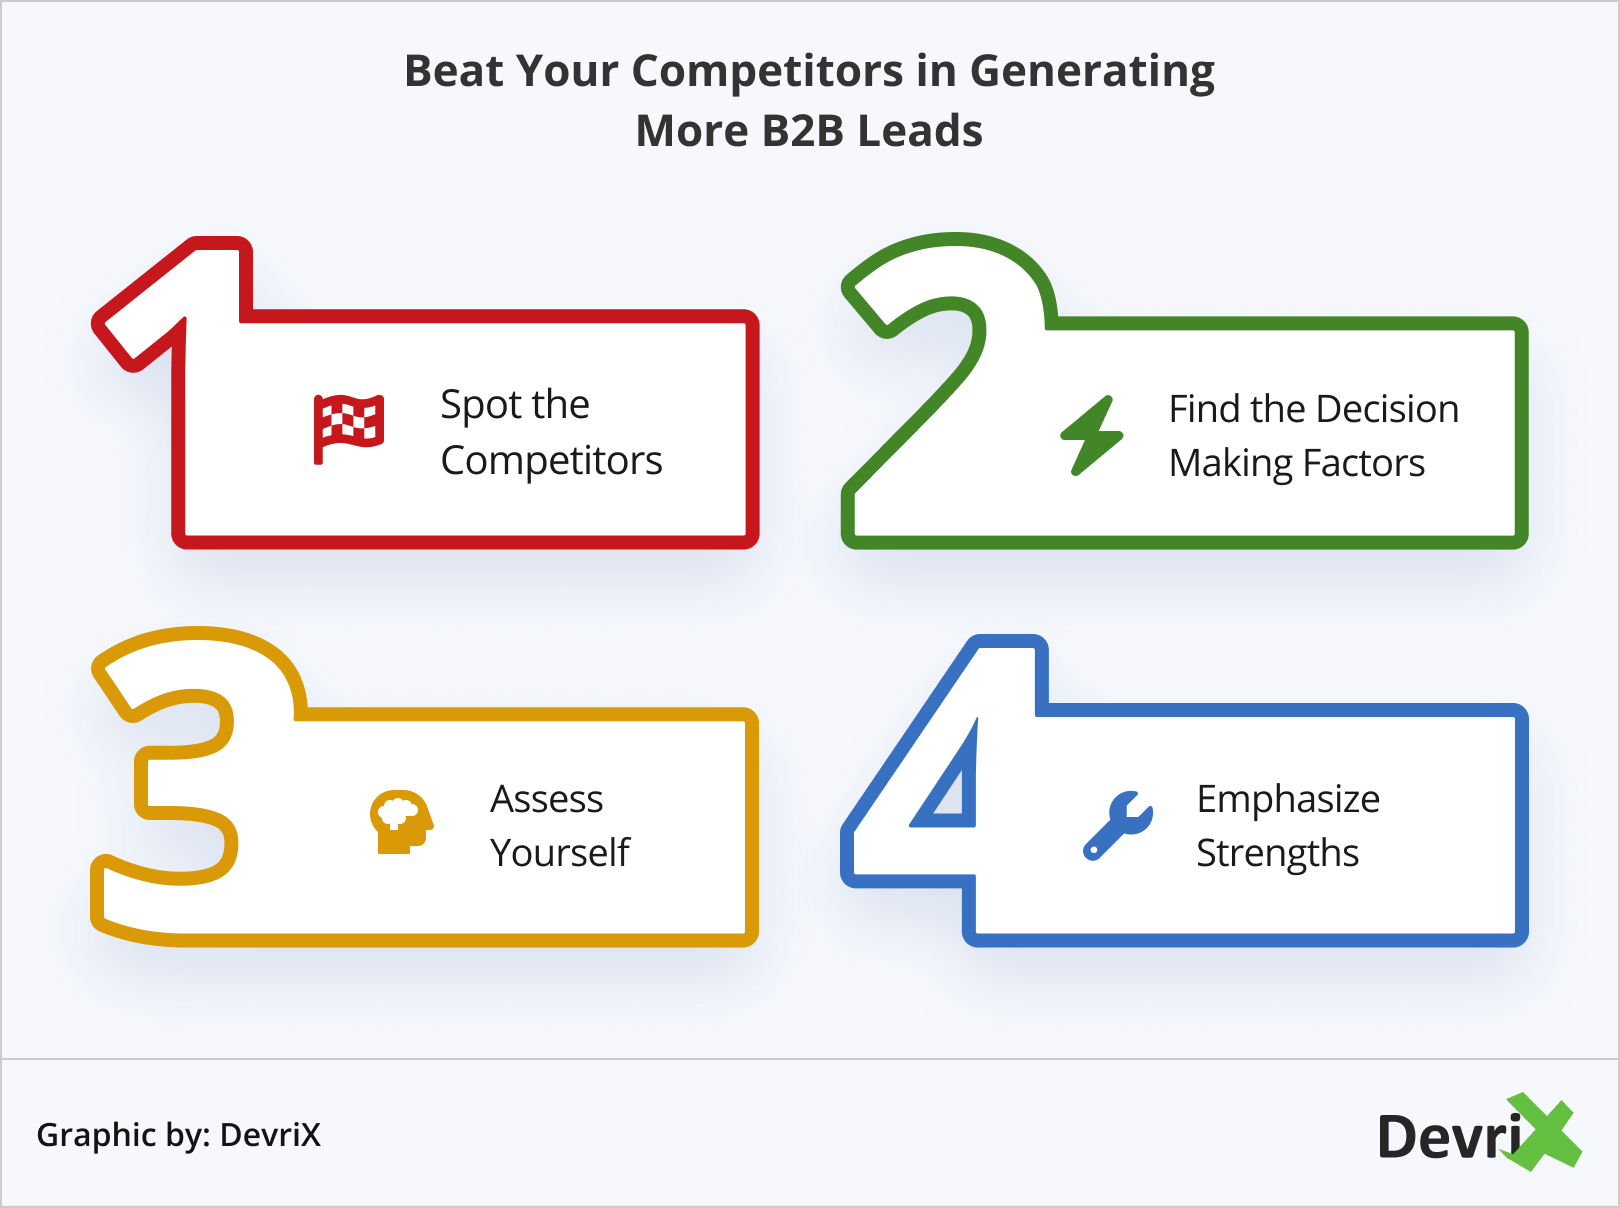 Beat Your Competitors in Generating More B2B Leads